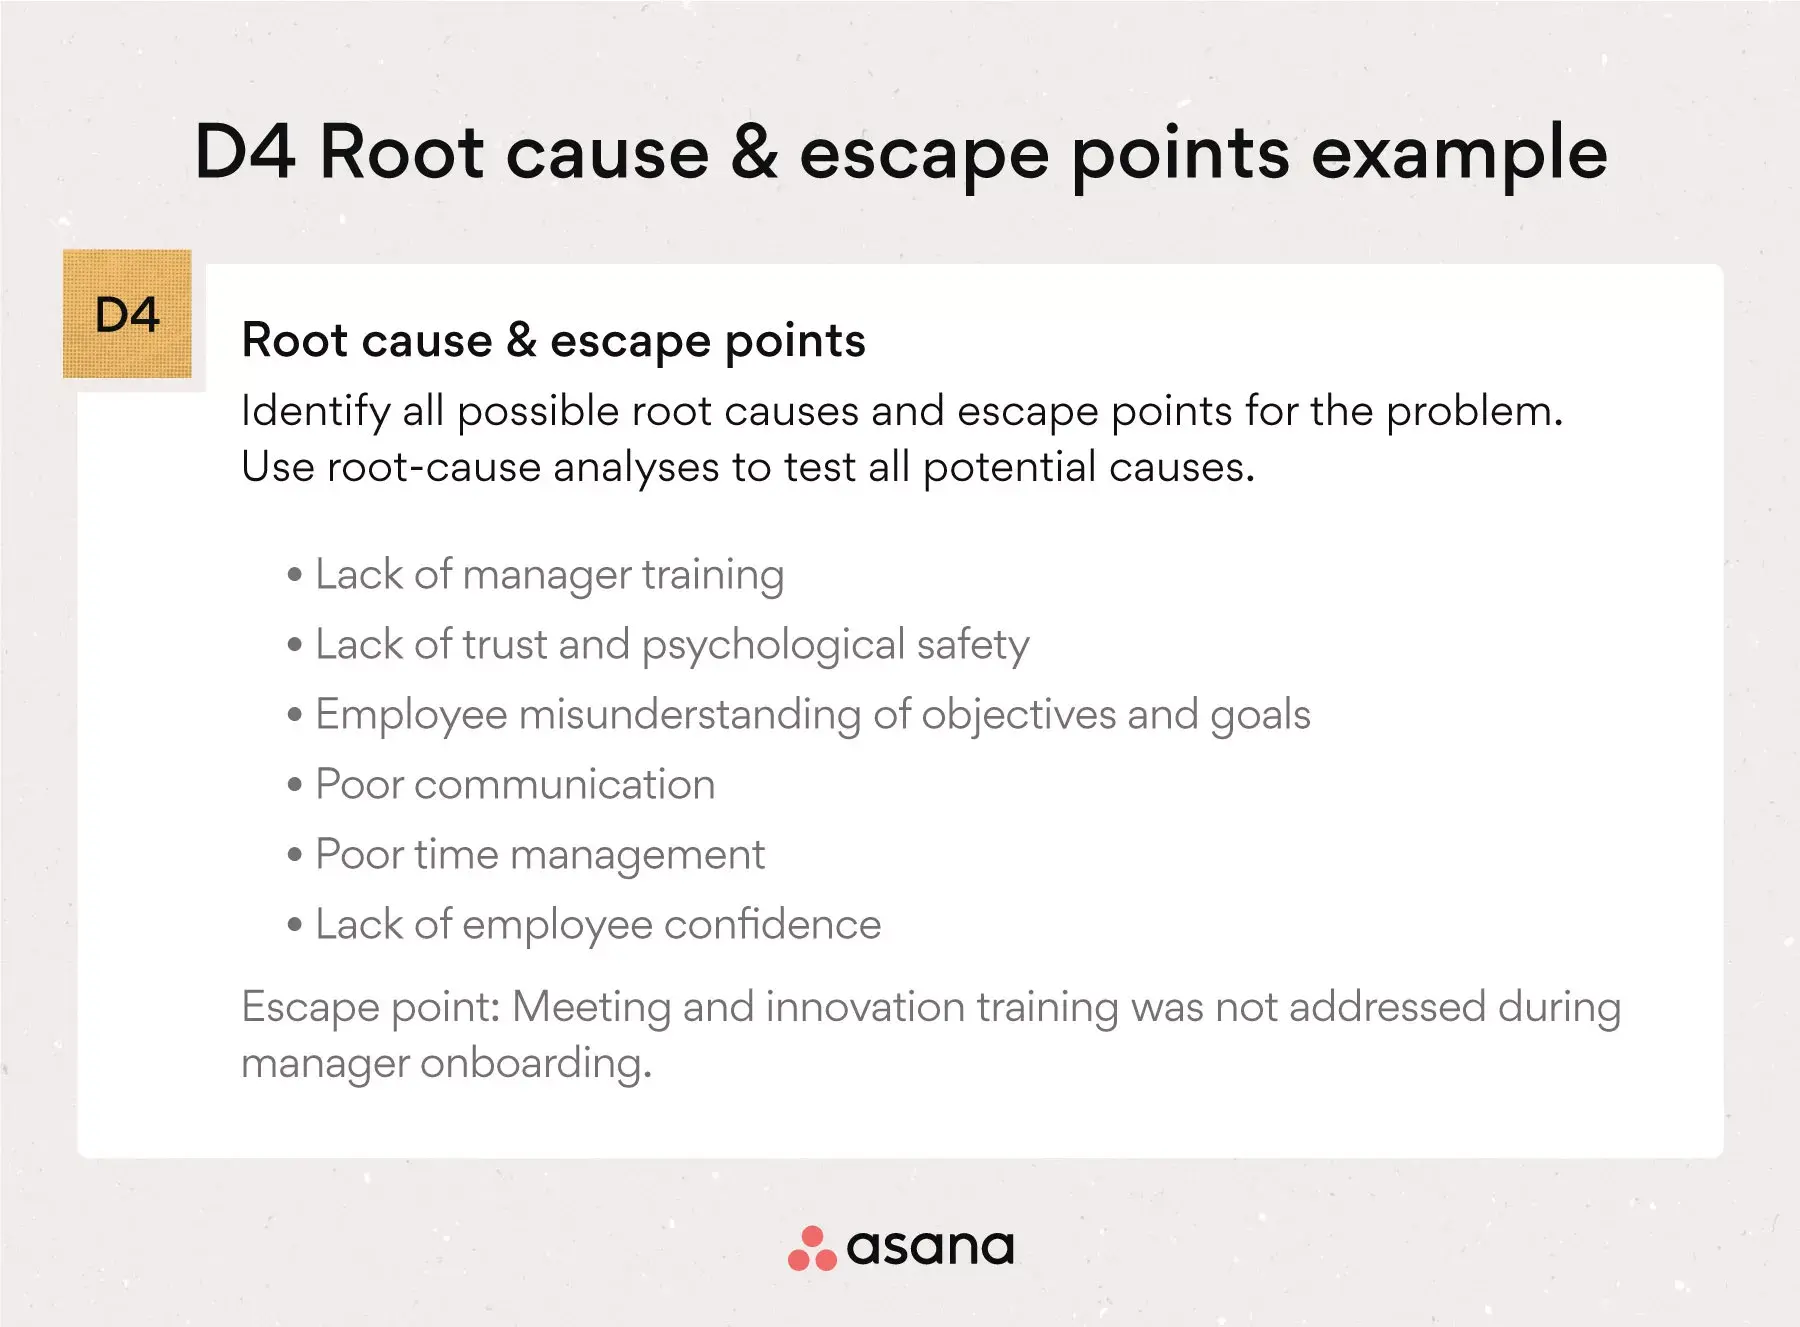 [inline illustration] D4 Root cause & escape points (example)